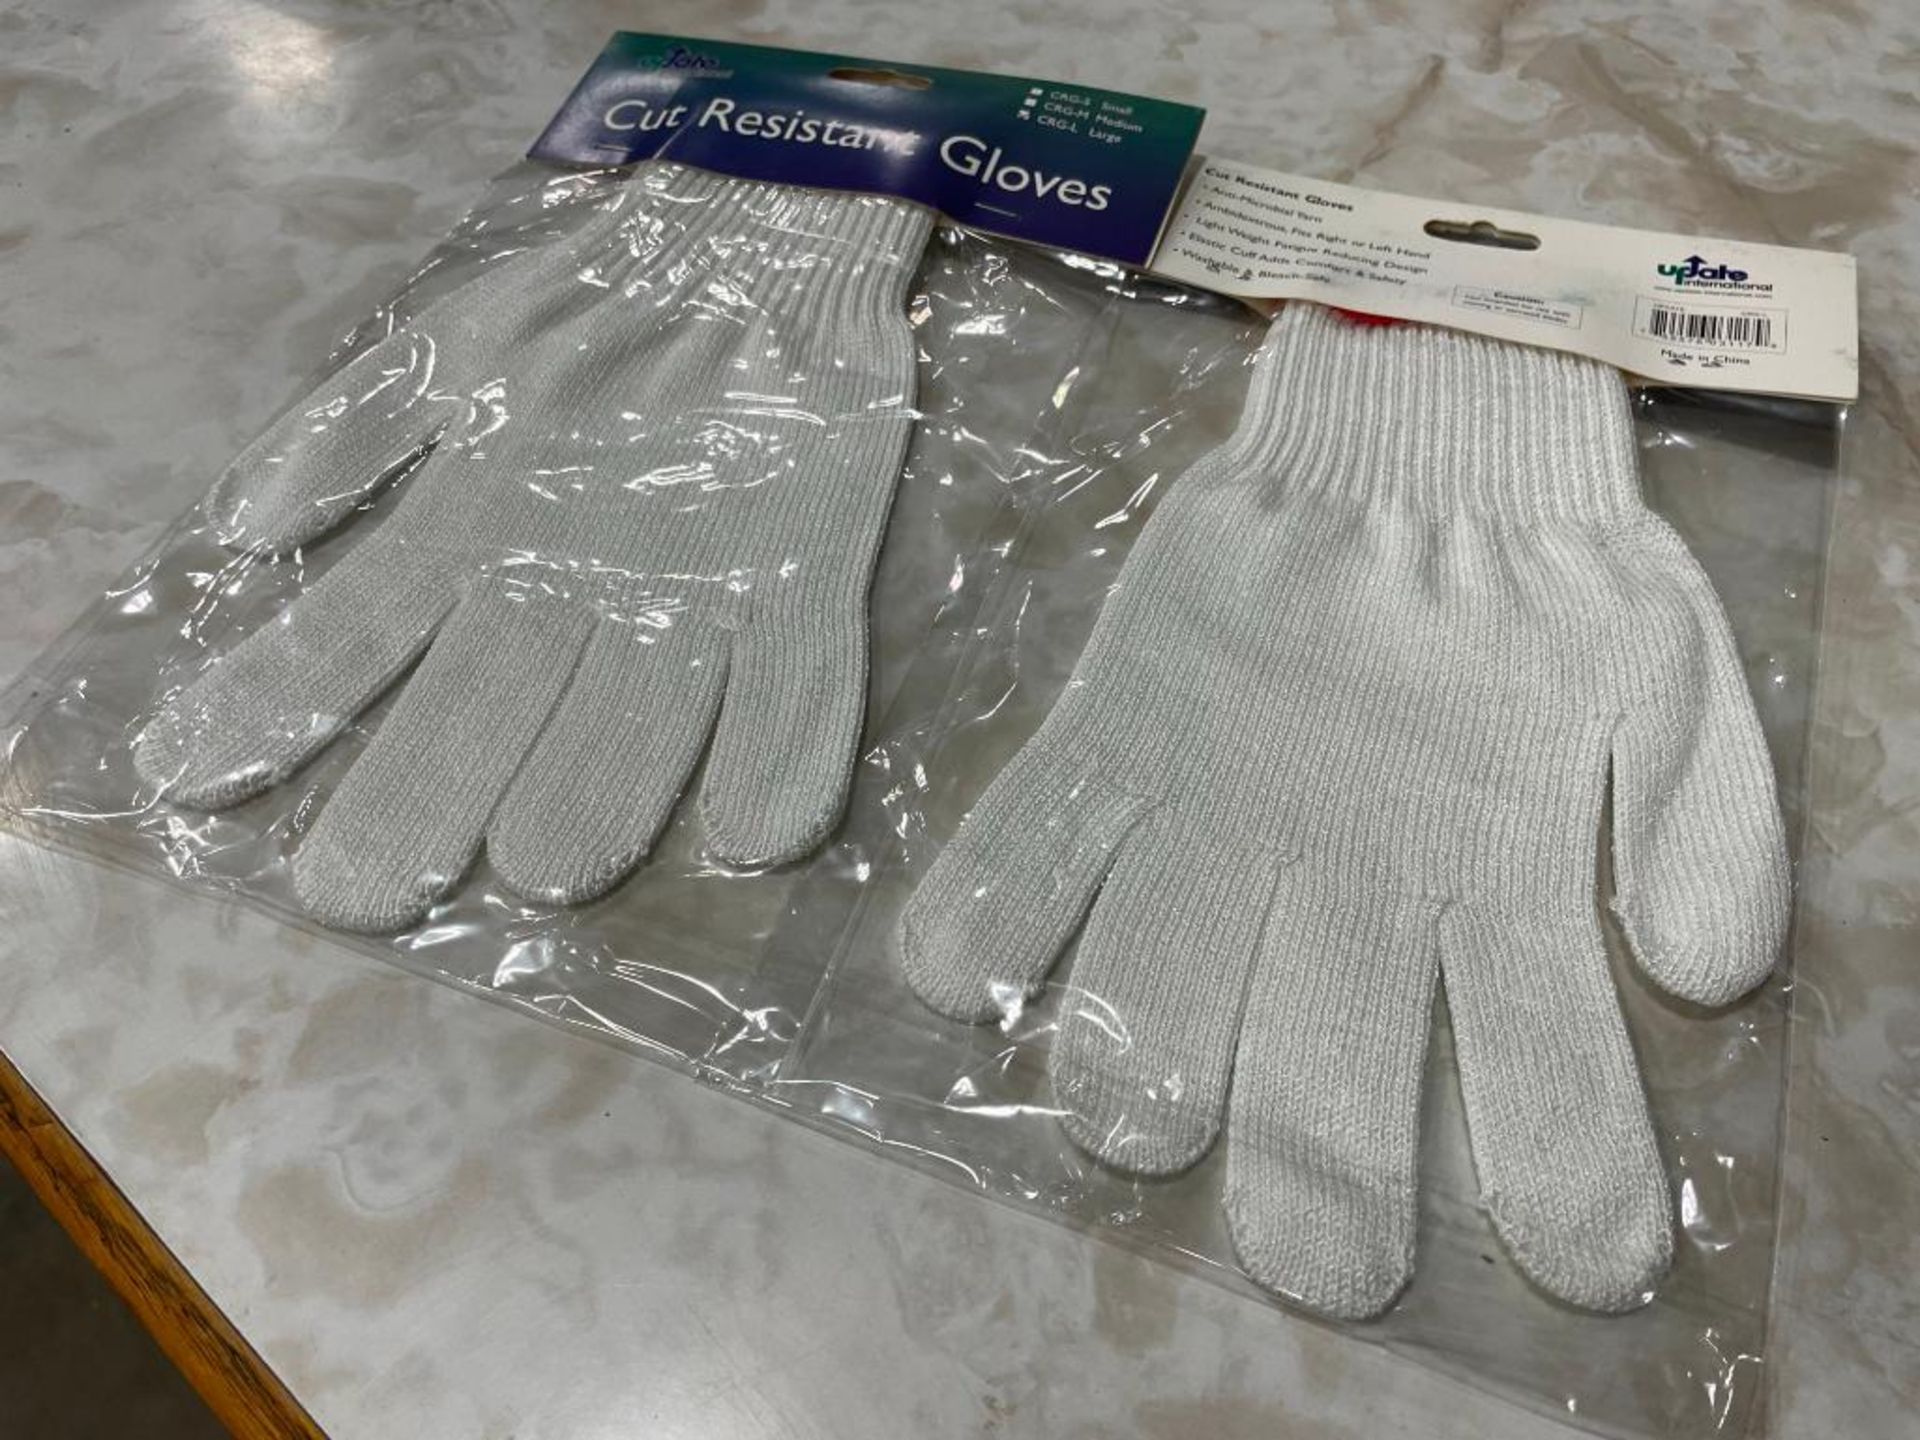 LOT OF (2) UPDATE CUT RESISTANT GLOVES - LARGE - Image 4 of 4